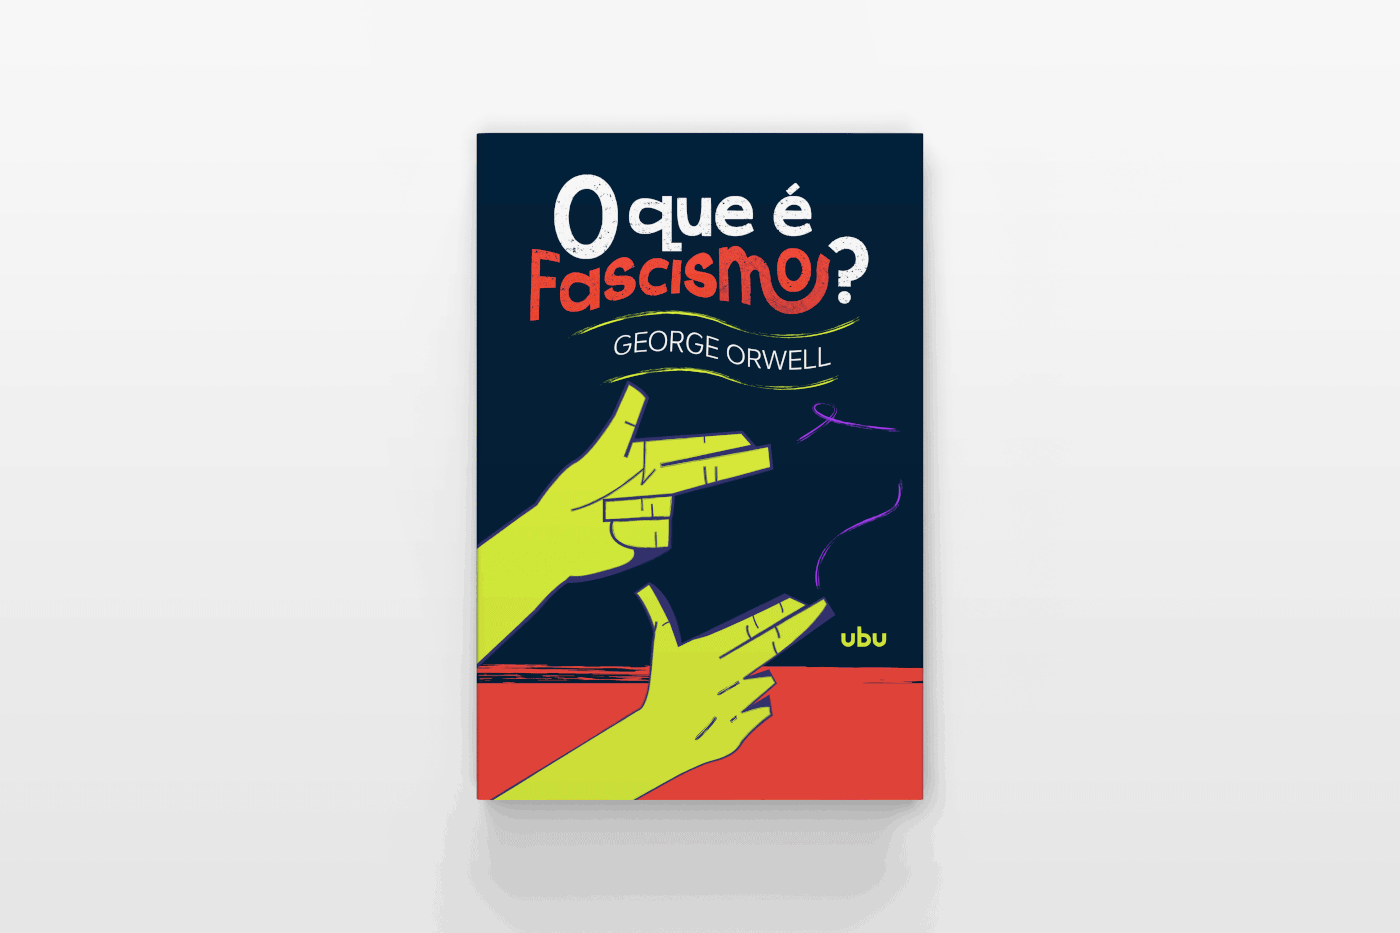 book cover books editorial Editorial Illustration George Orwell lettering LIVROS